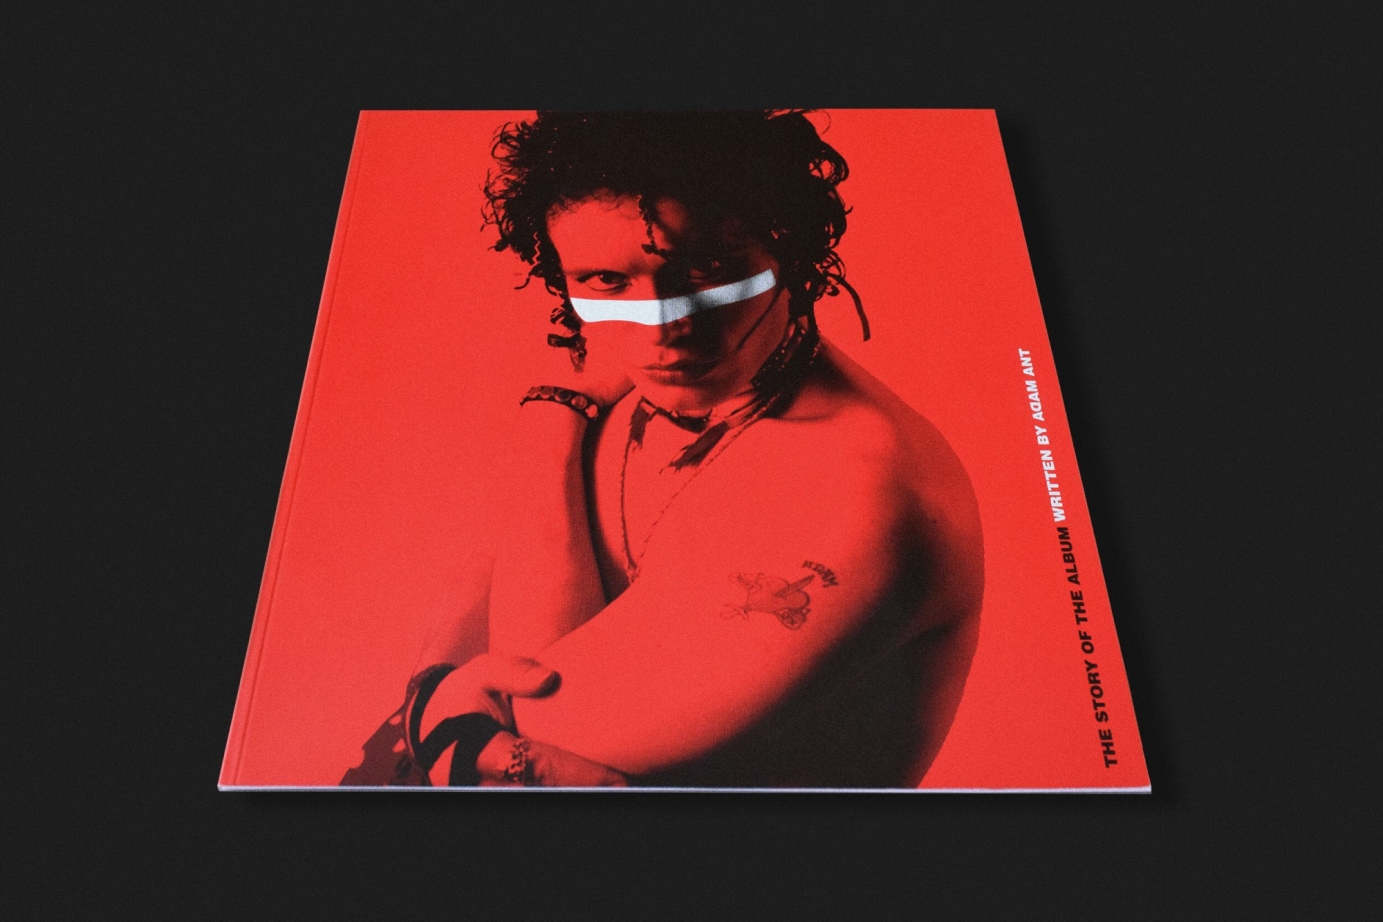 Adam Ant – Kings of the Wild Frontier (Limited Edition Booklet)